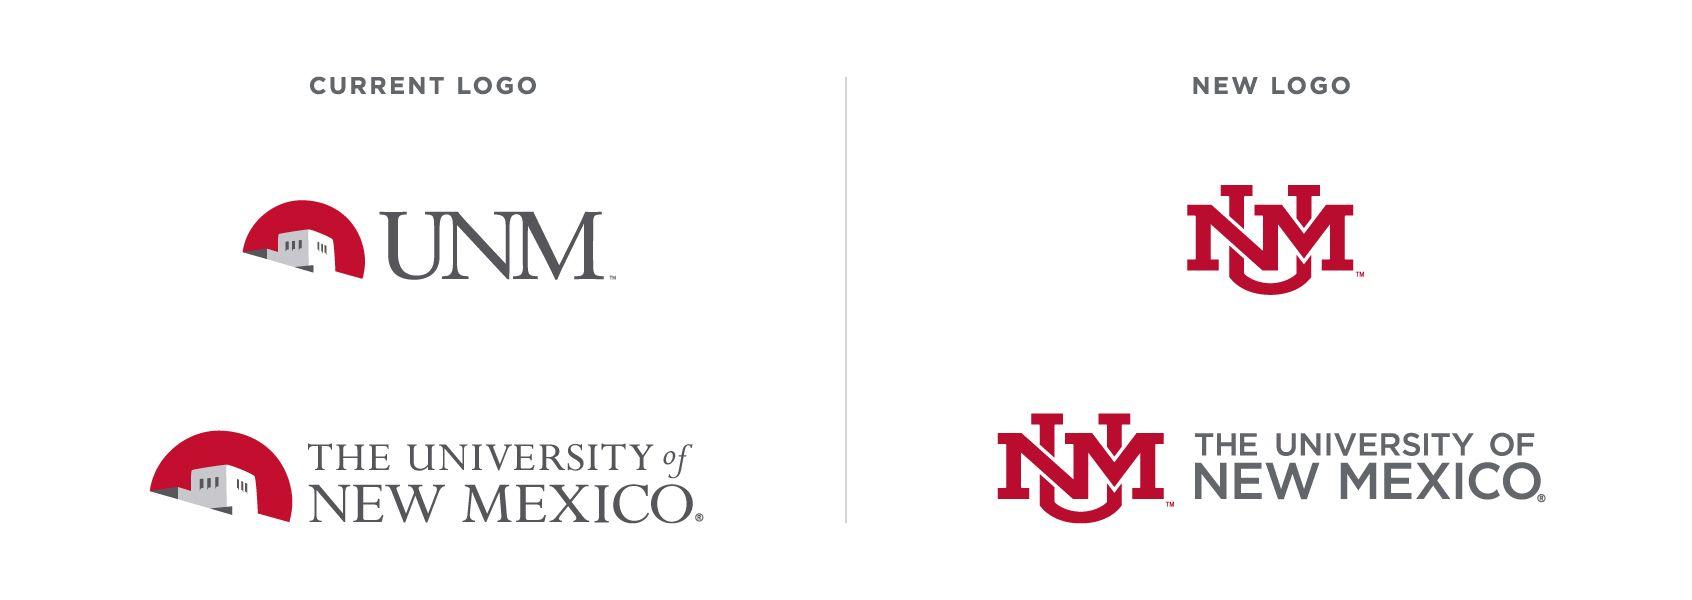 UNM Logo - Questions and Answers - Marketing & Communication. The University